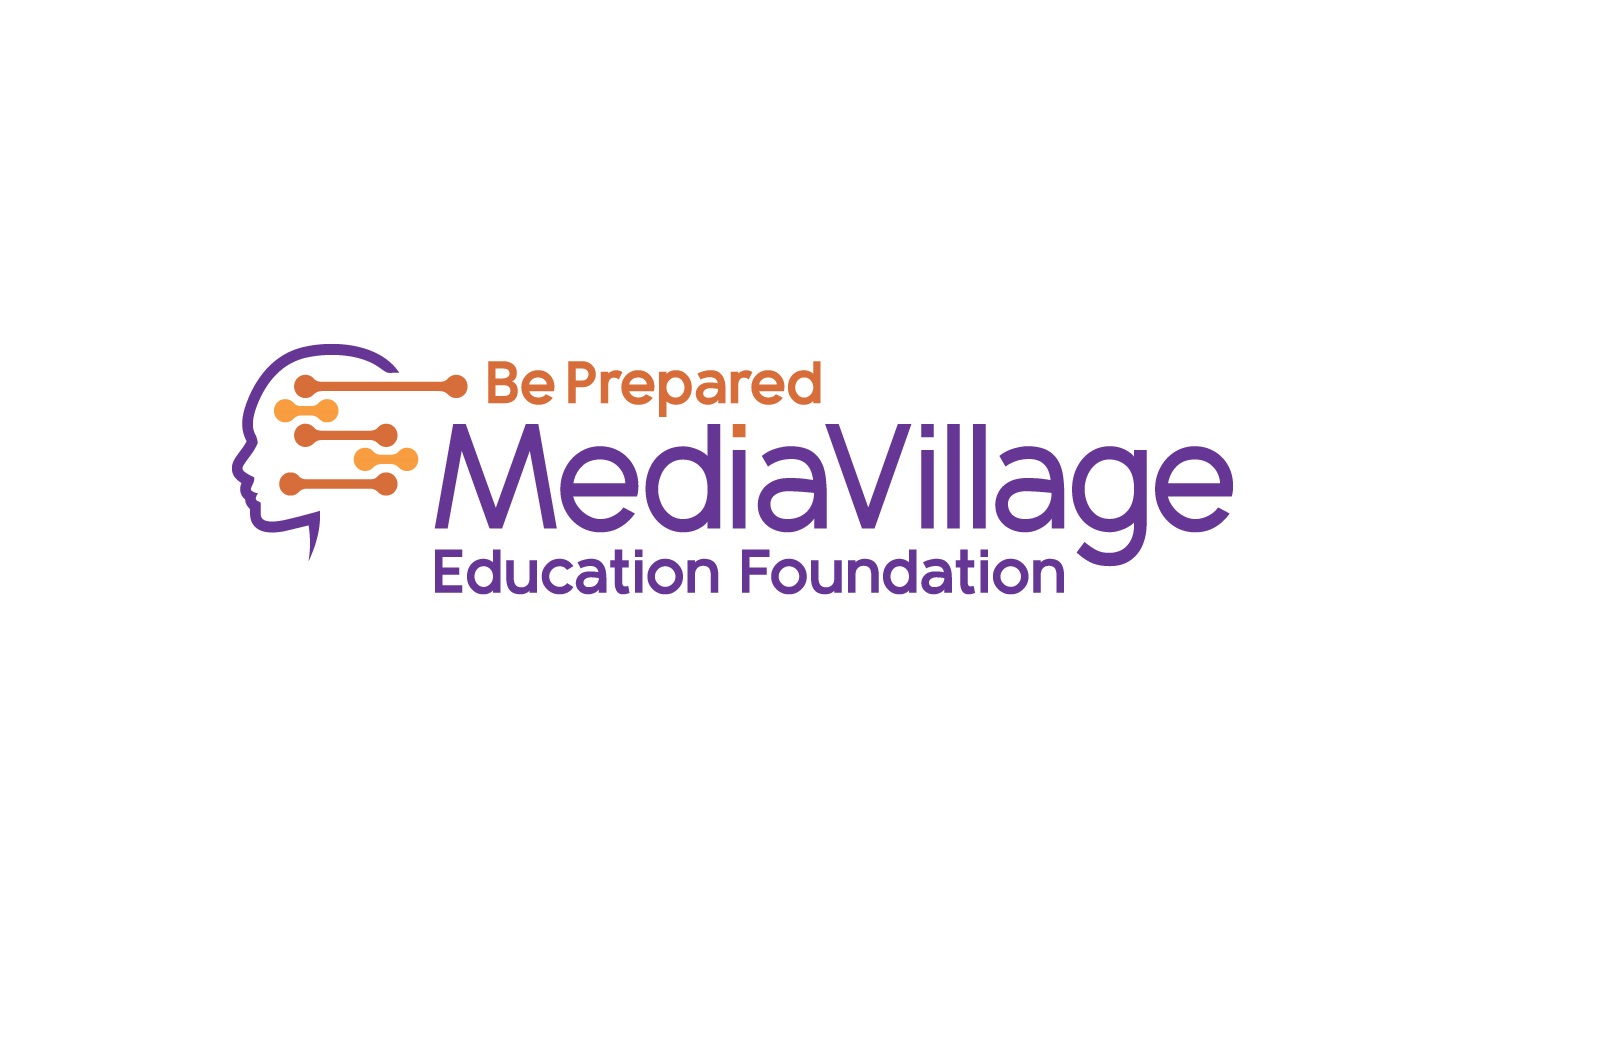 Cover image for  article: MediaVillage Converts to Non-Profit Foundation Focused on Investing in Next Generation Workforce Education and Preparation